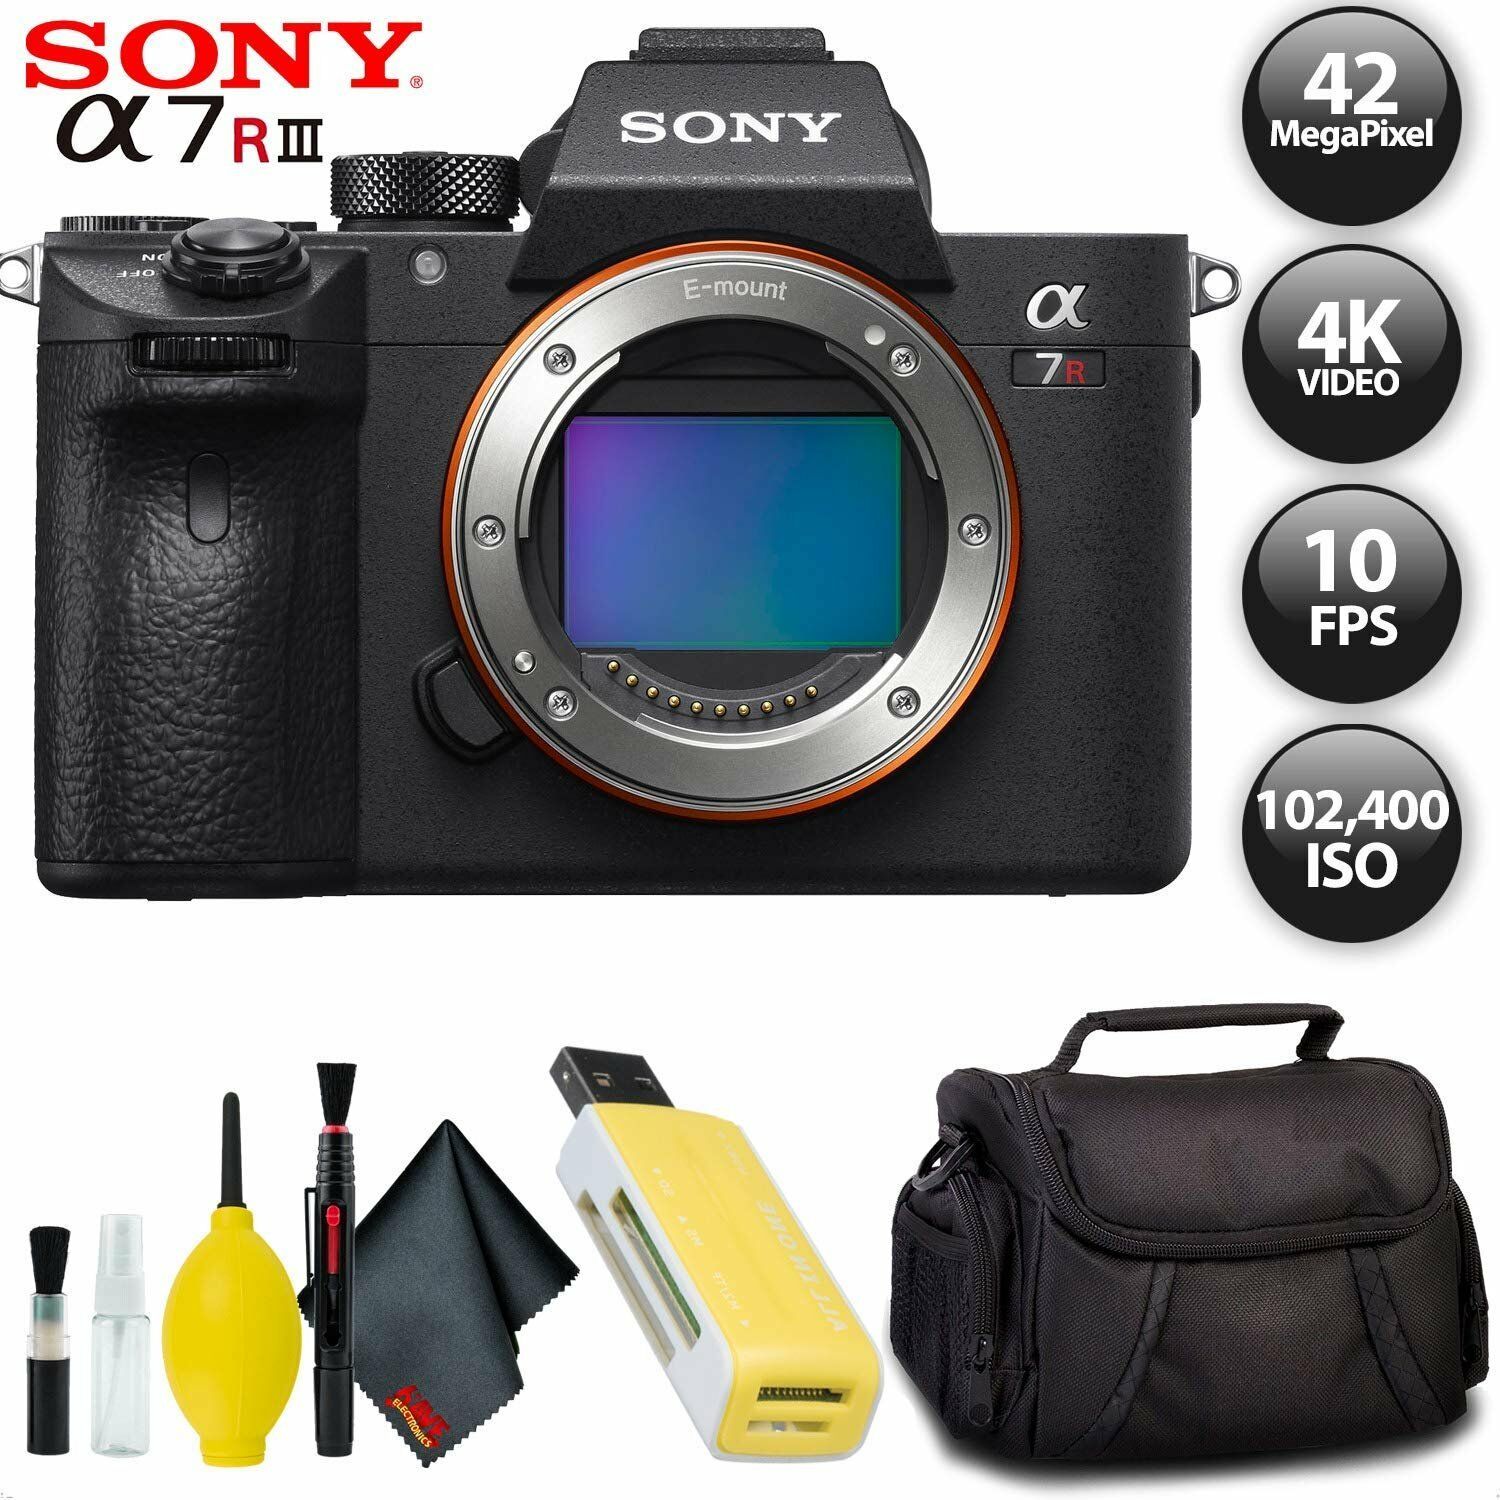 Sony Alpha a7R III Mirrorless Digital Camera + 32GB Memory Card Base Kit with Accessories